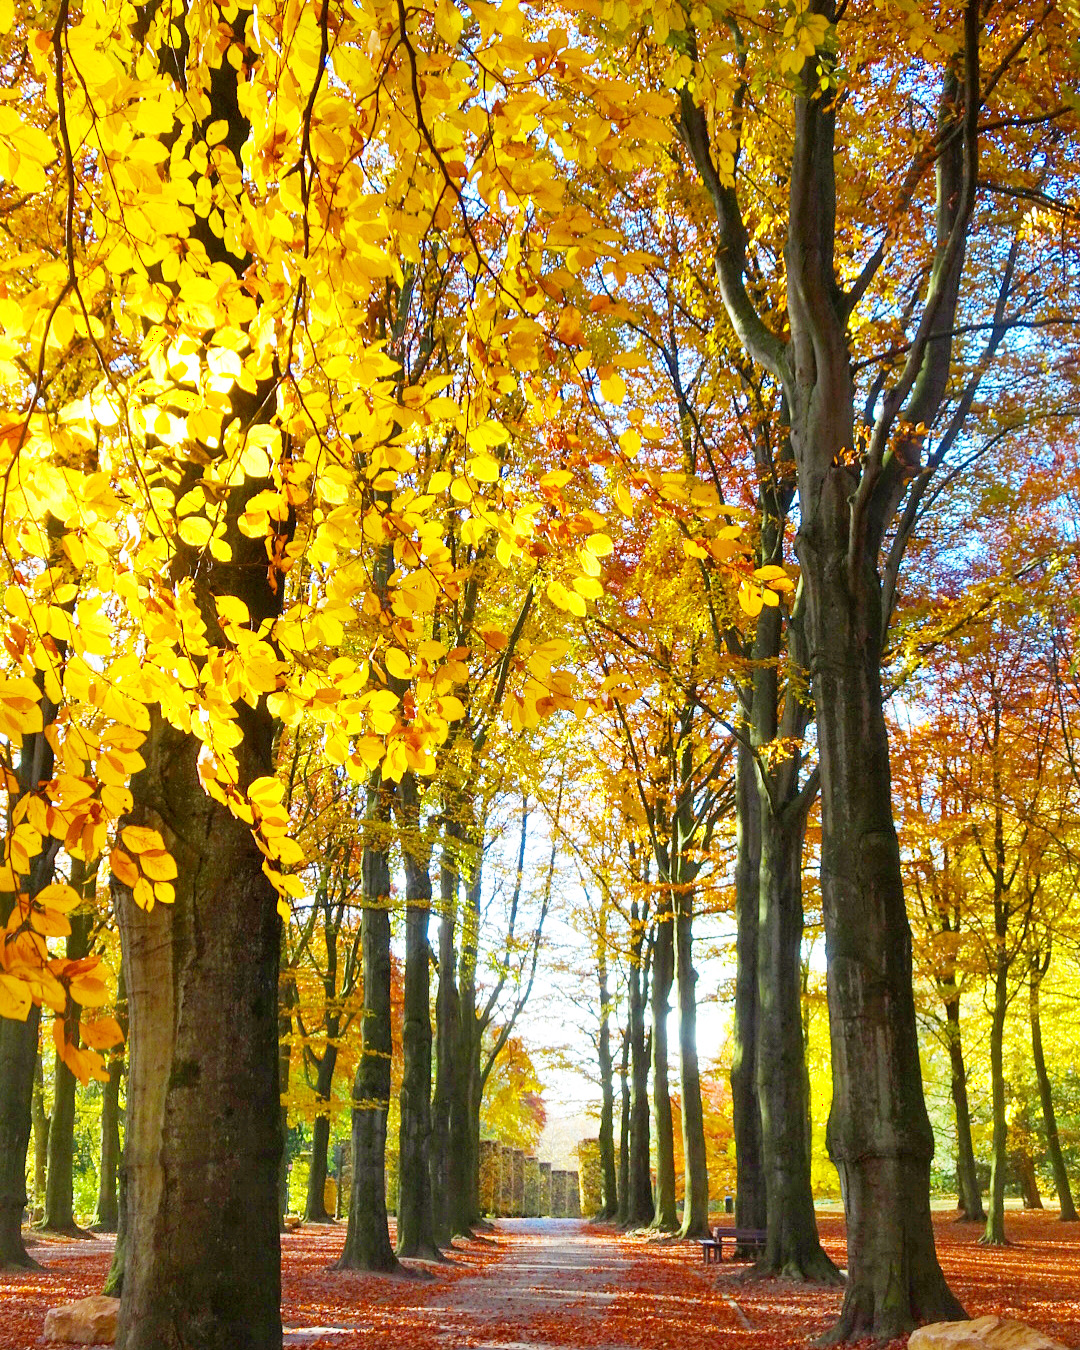 An avenue of autumnal trees in a Brussels park